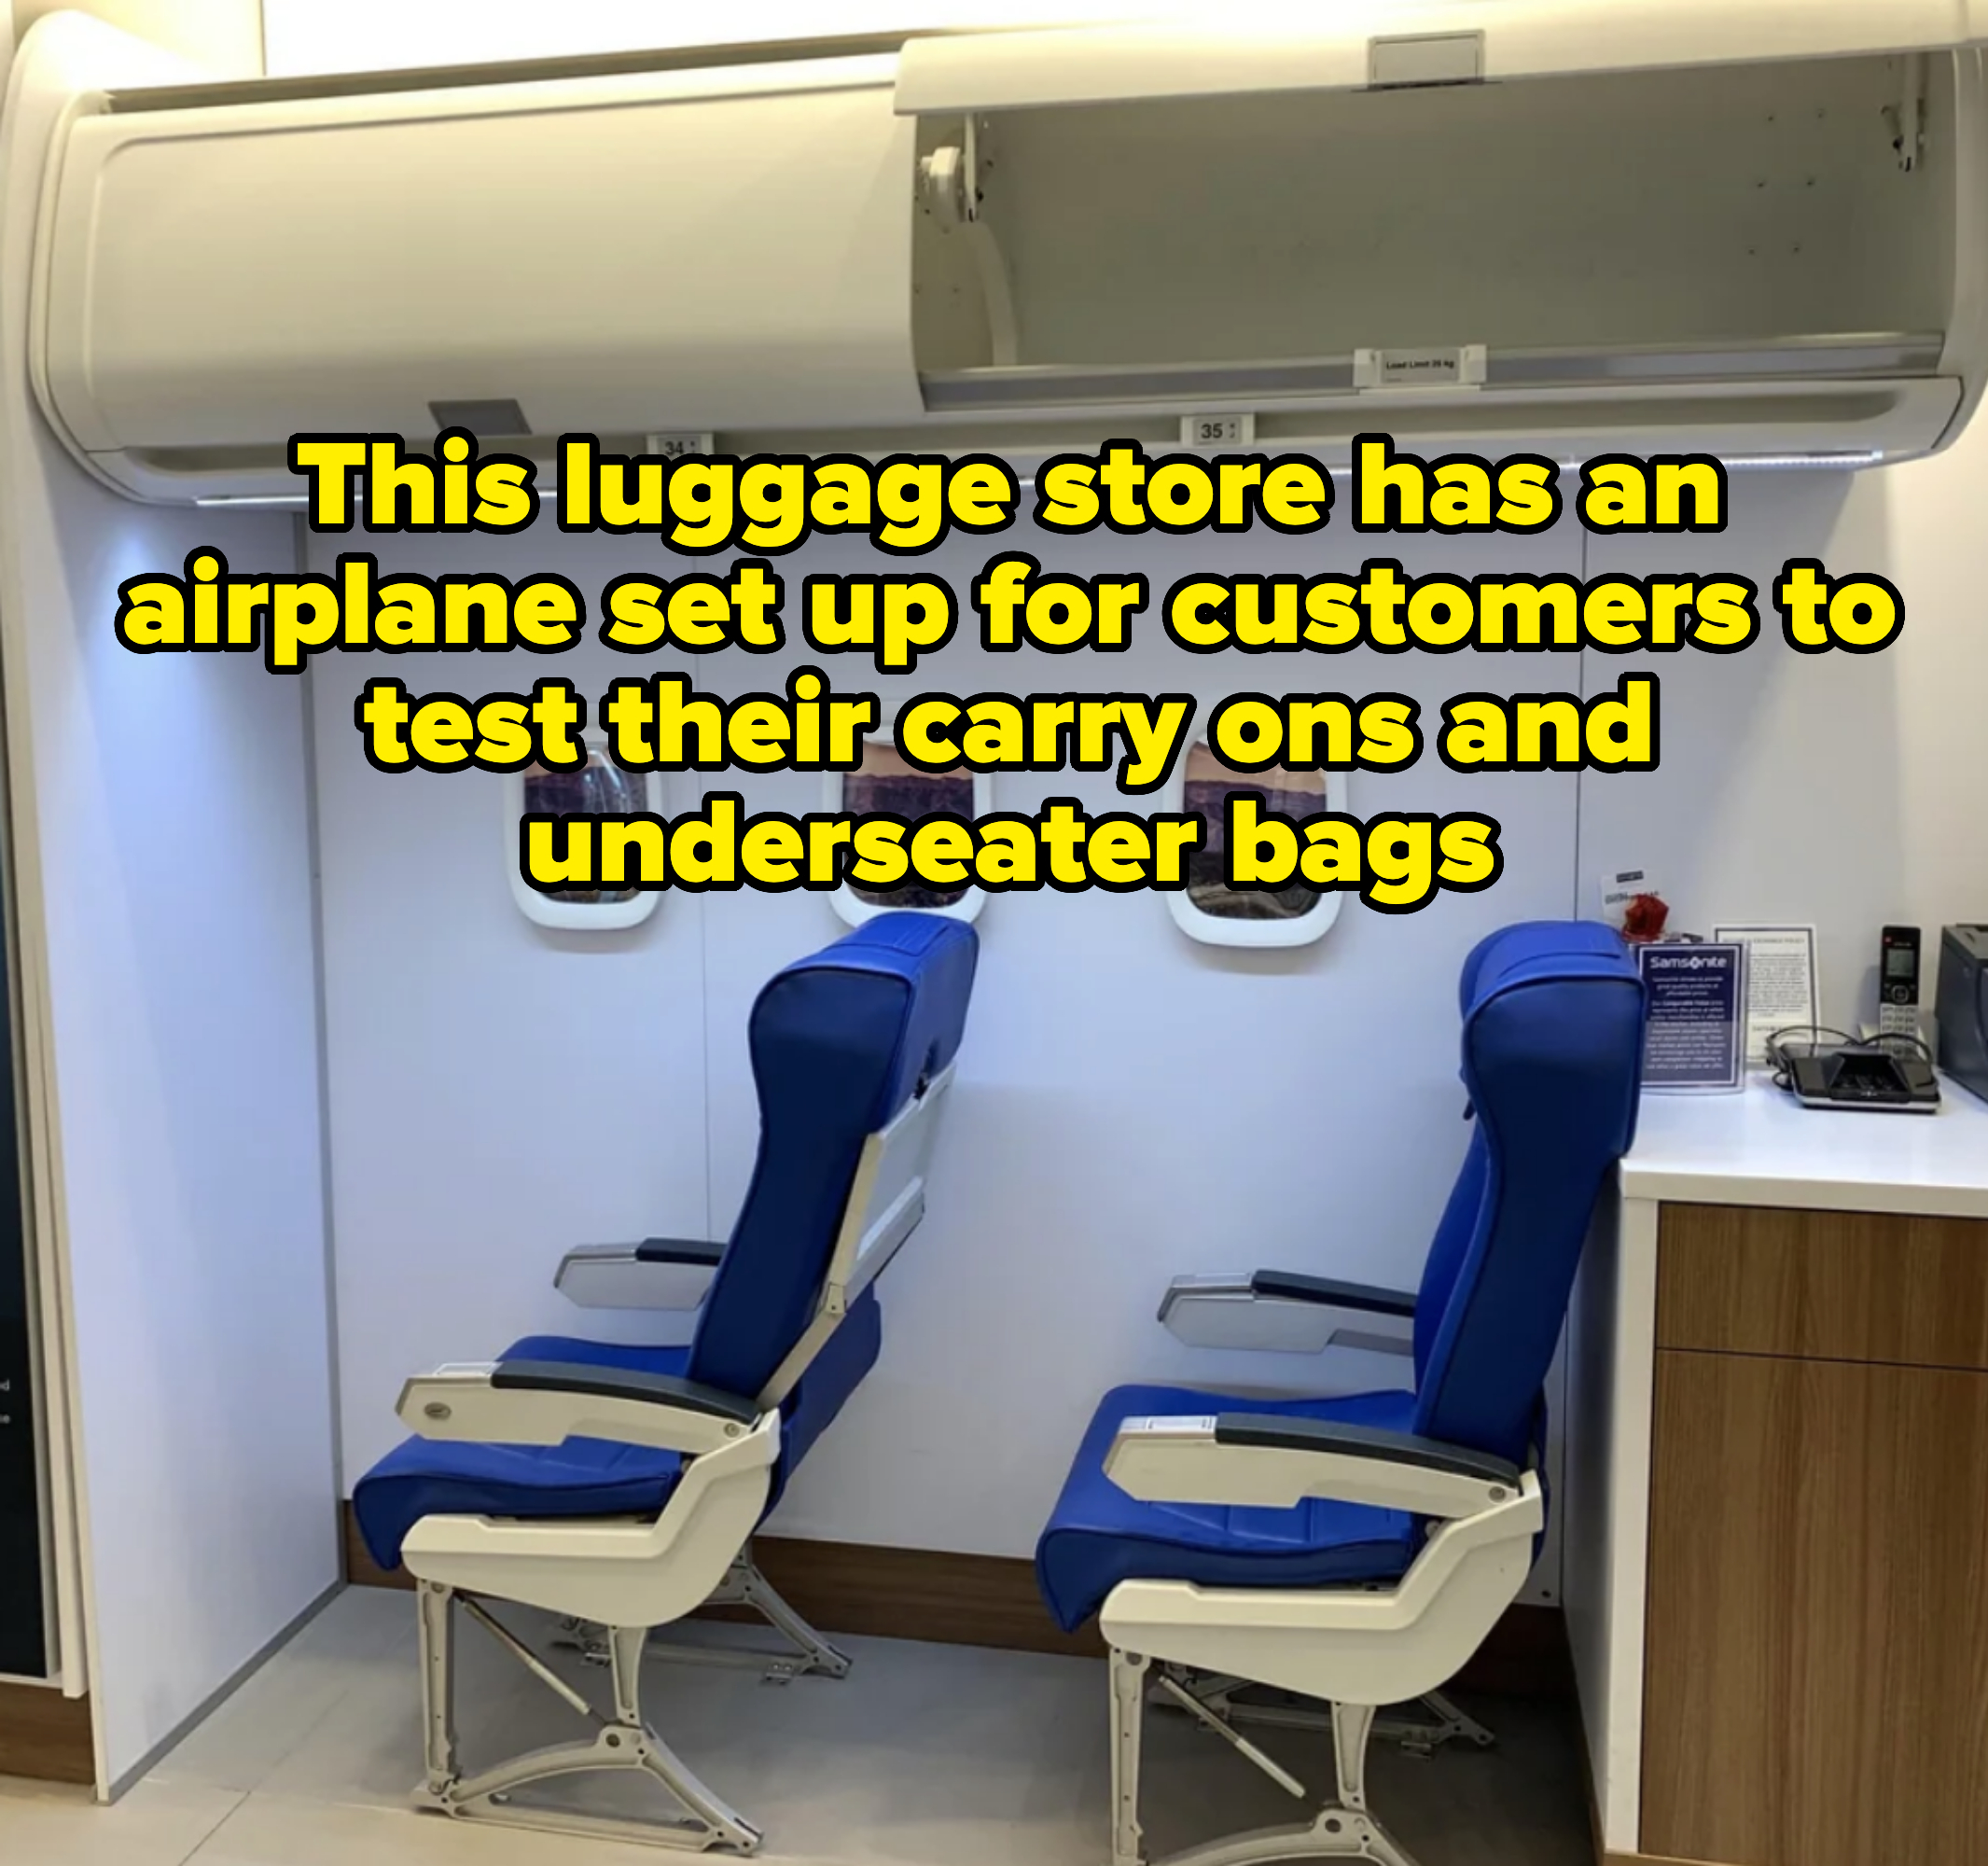 Airline cabin mockup with seats and overhead compartments for customer service training